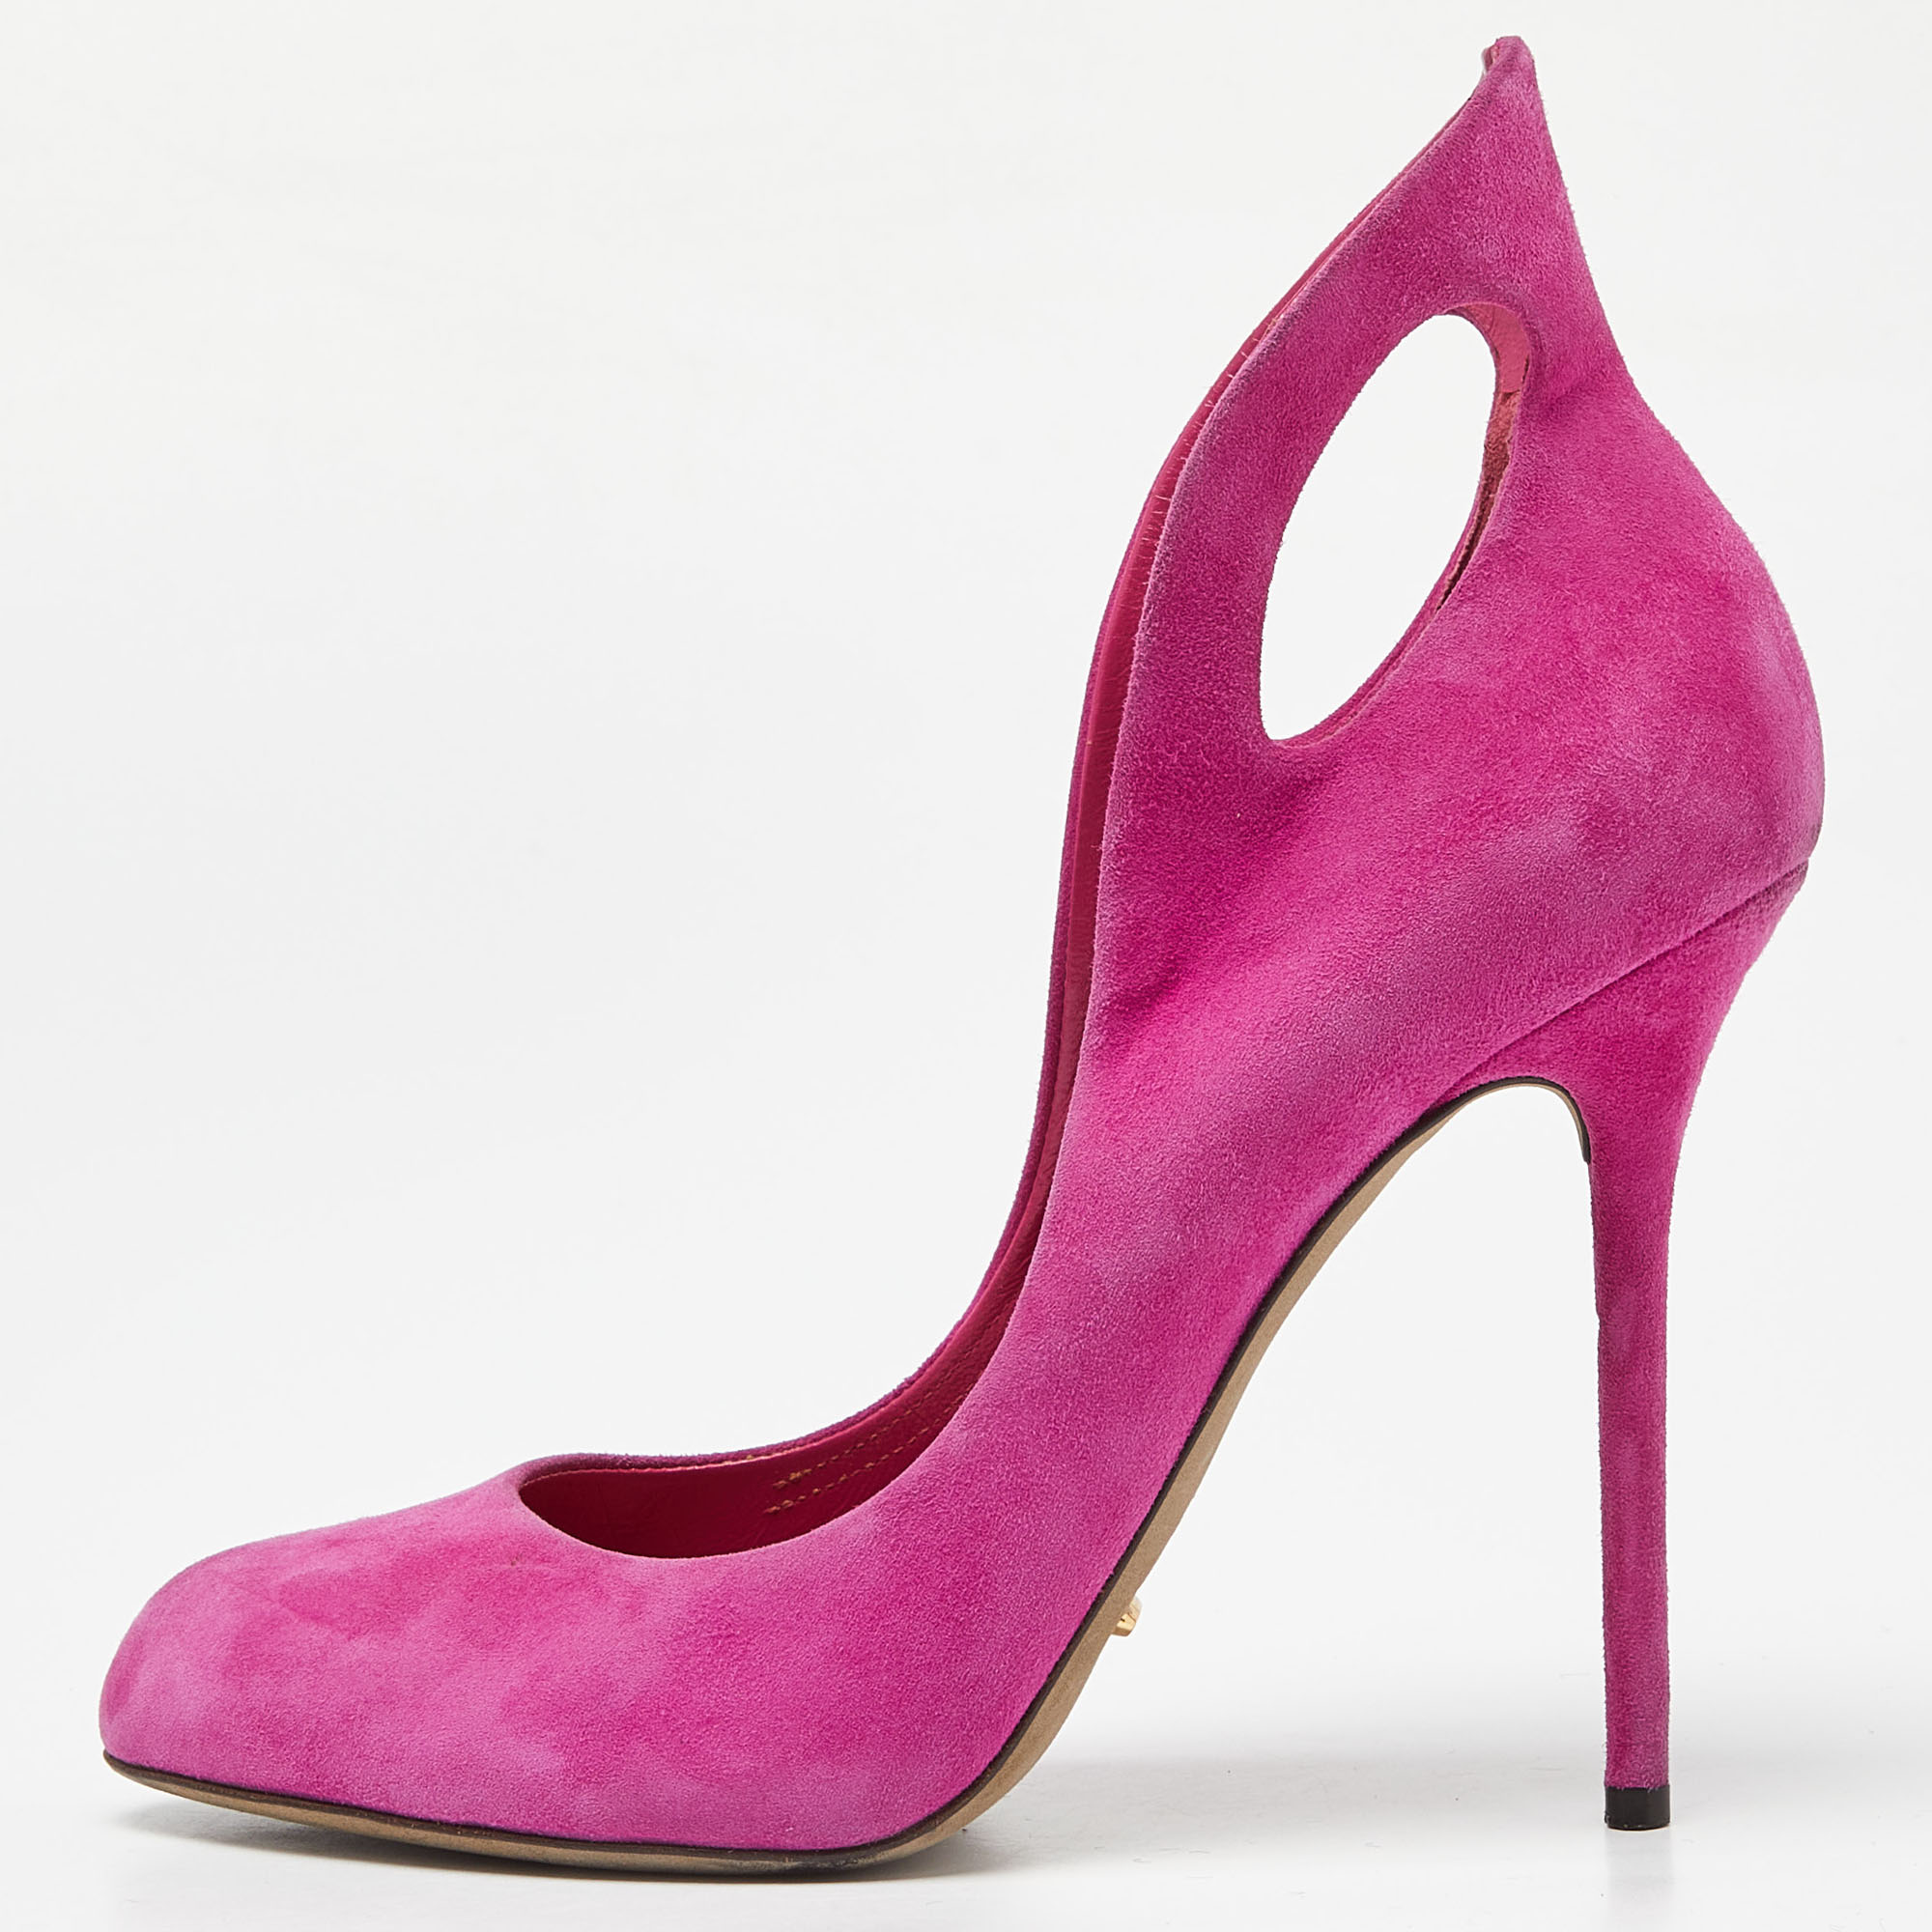 Sergio rossi pink suede oblo cut out pumps size 39